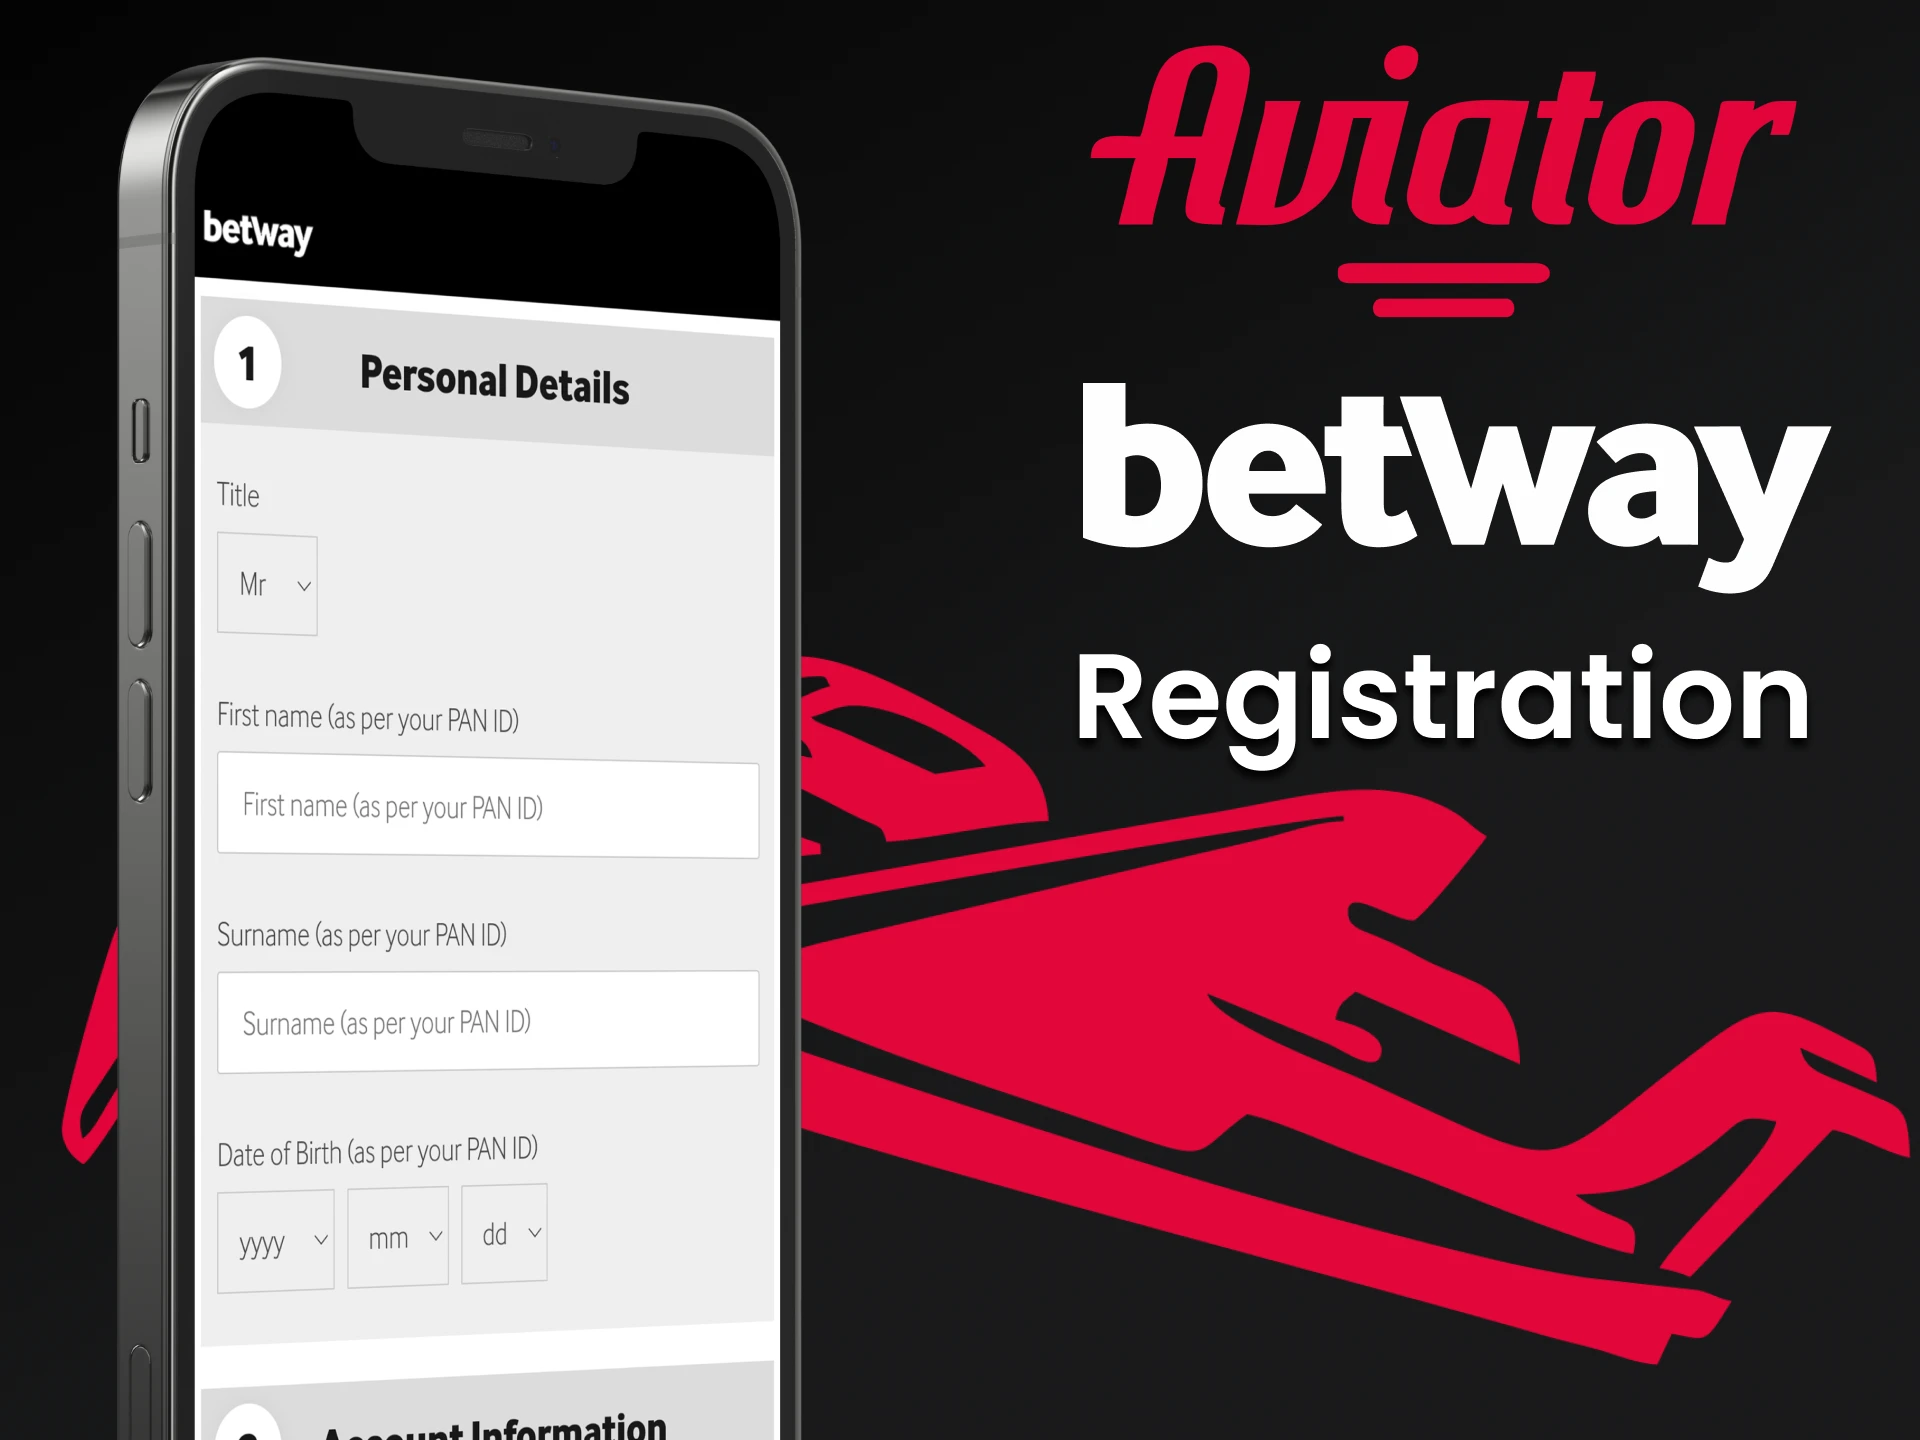 To start playing Aviator on Betway, create an account.